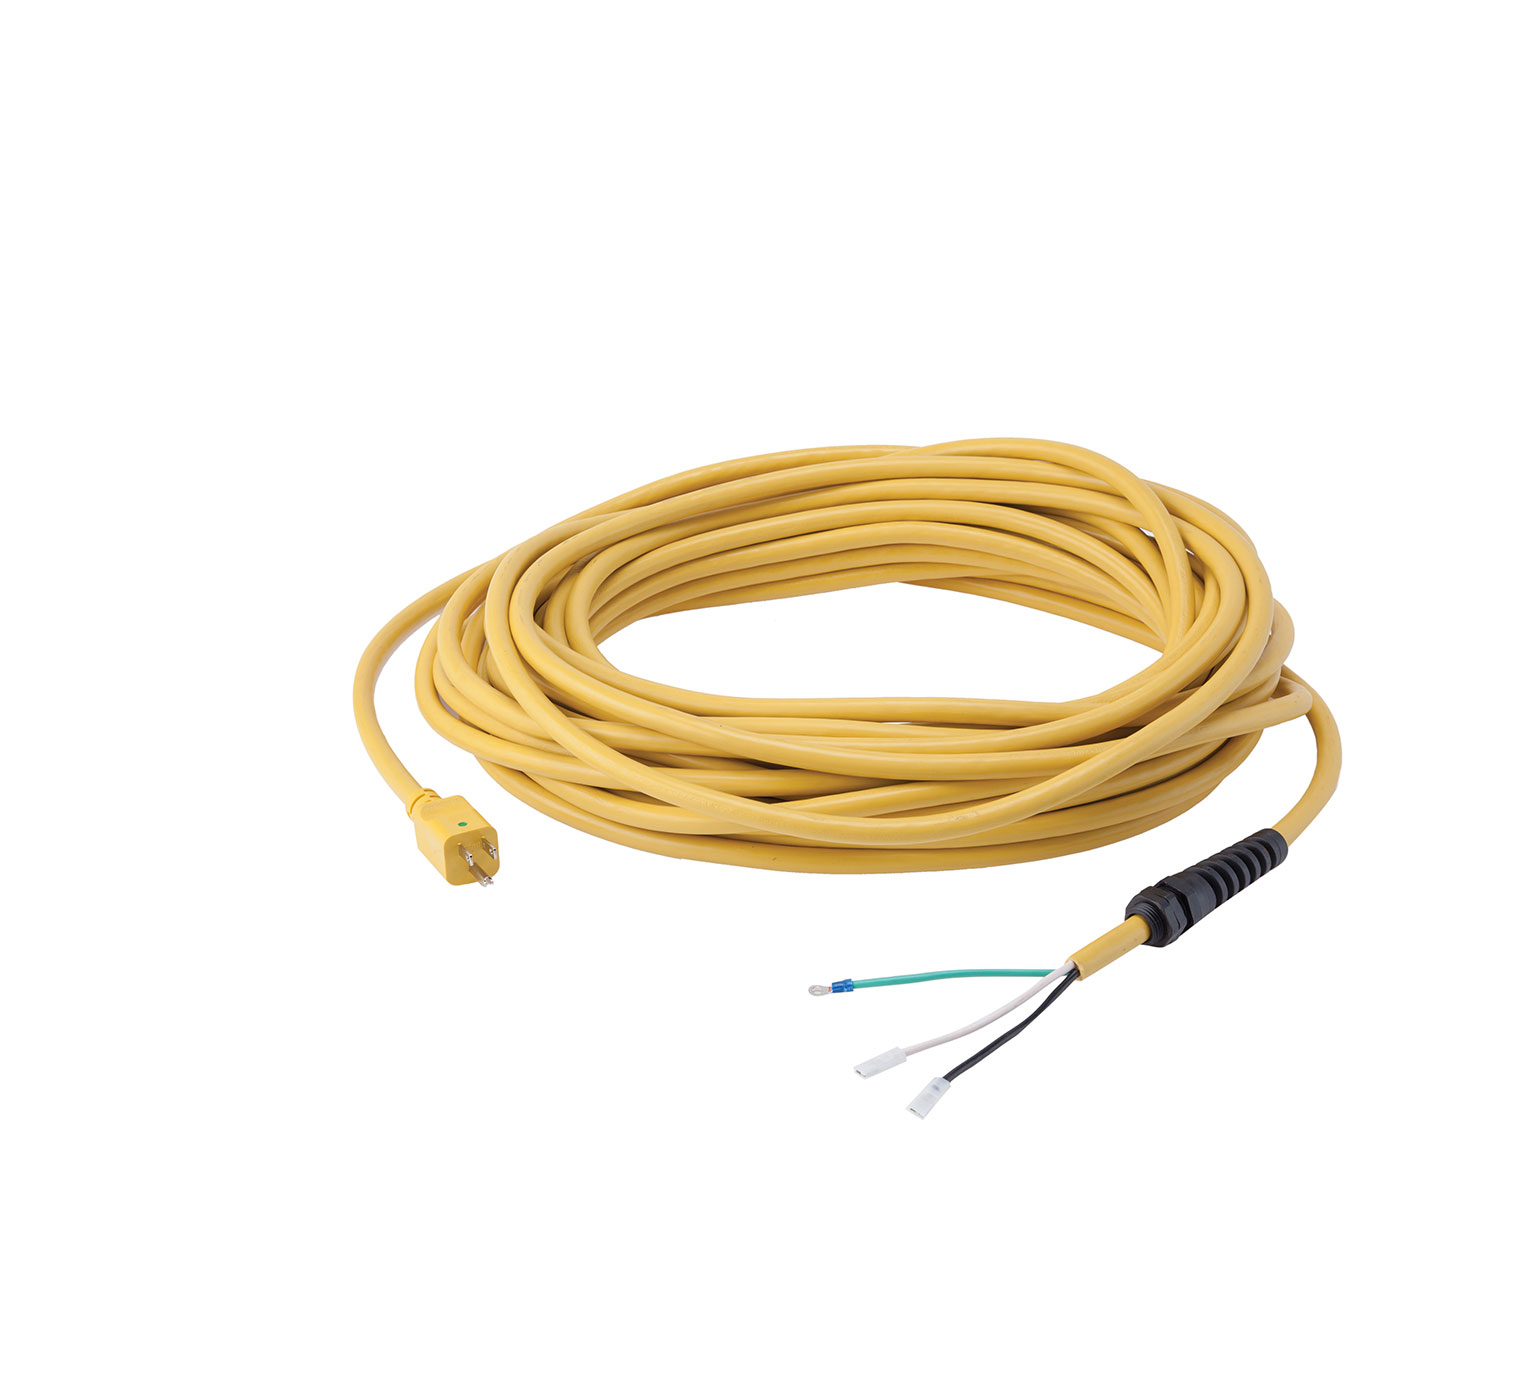 Yellow Power Cord with Grips - 75 ft 610974